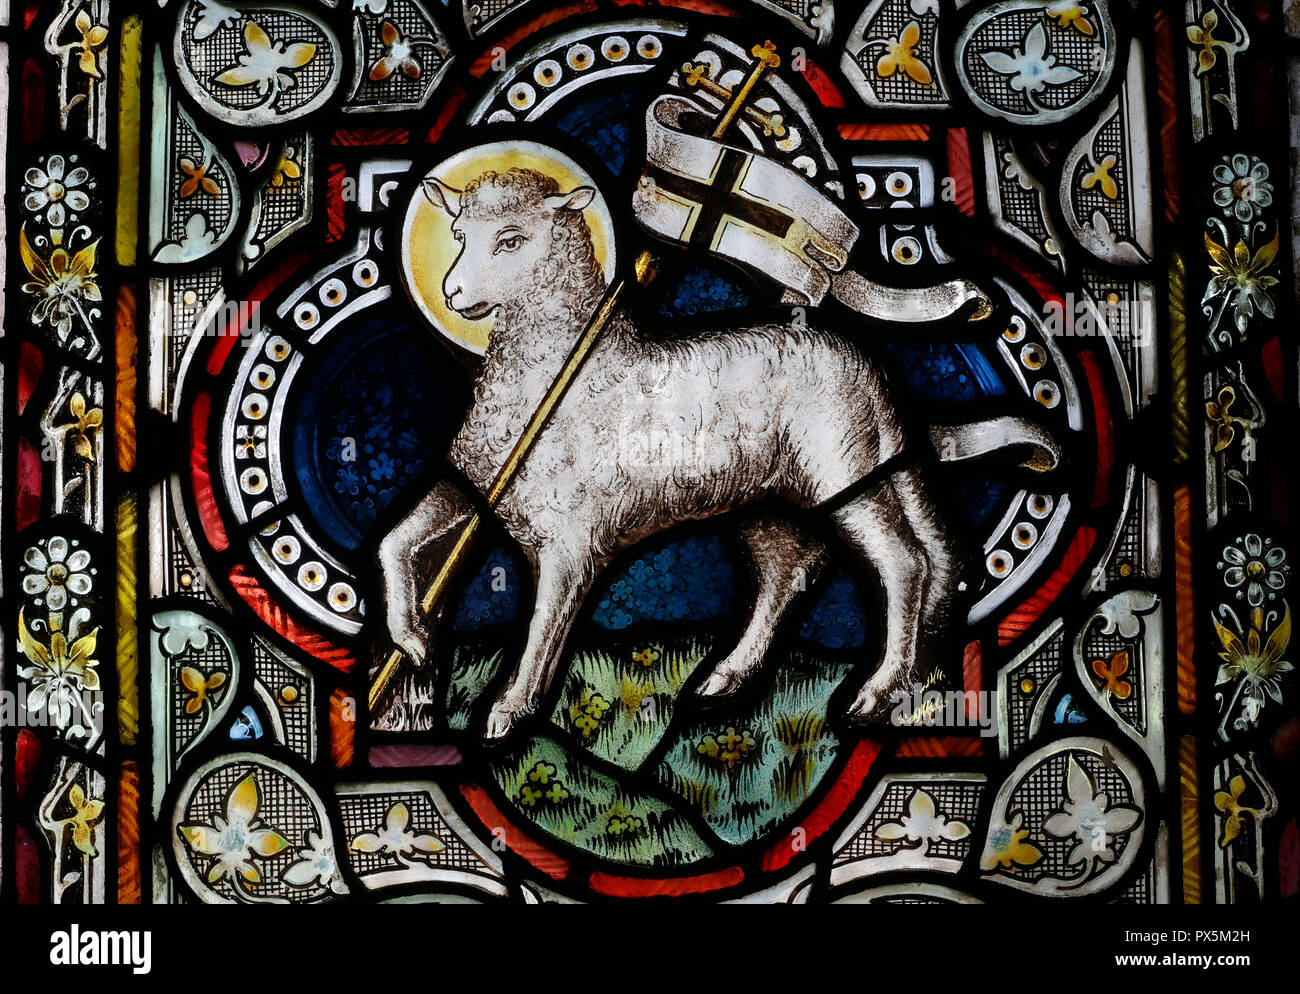 Agnus Dei Stained Glass